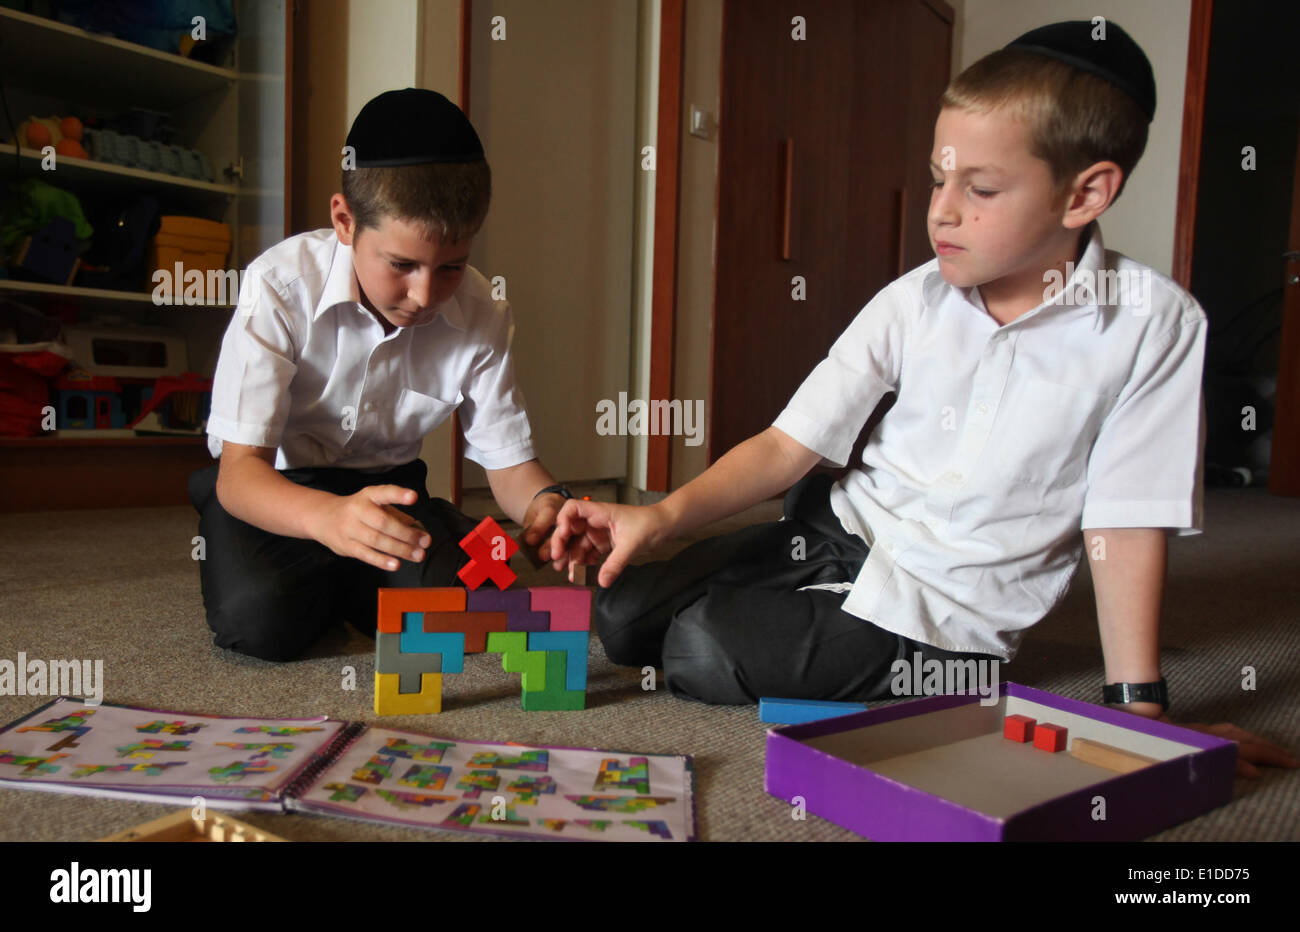 (140601) -- JERUSALEM, June 1, 2014 (Xinhua) -- Tzviel Noyman (L) and his brother Dudik Noyman assemble building blocks at their home in Beit Shemesh, about 20 km from Jerusalem, on May 30, 2014. Tzviel Noyman is an Israeli Ultra-Orthodox boy in a family with six children, three boys and three girls. He is ten years old this year and a grade three pupil of Torat Moshe elementary school, which is only opened to Jewish children. Tzviel has eight classes each day, including Hebrew, English, mathematics and Jewish religion, which has four classes each day including Talmud, Mishnah and Gemara. Tzvi Stock Photo